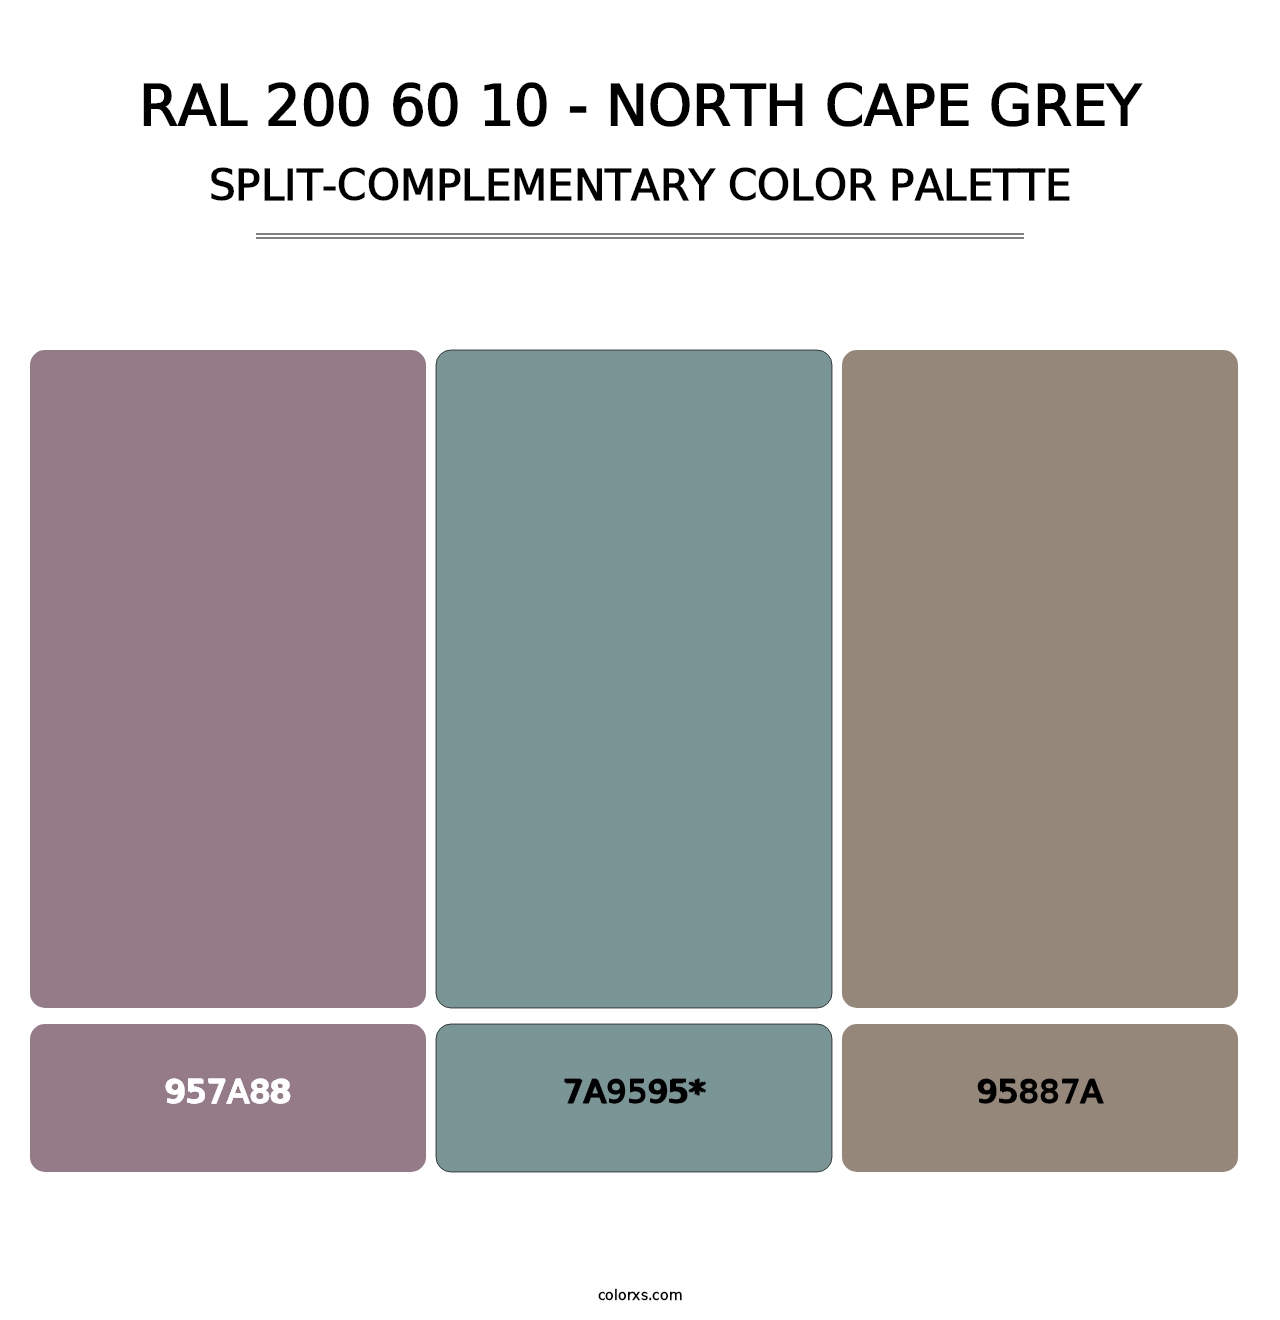 RAL 200 60 10 - North Cape Grey - Split-Complementary Color Palette